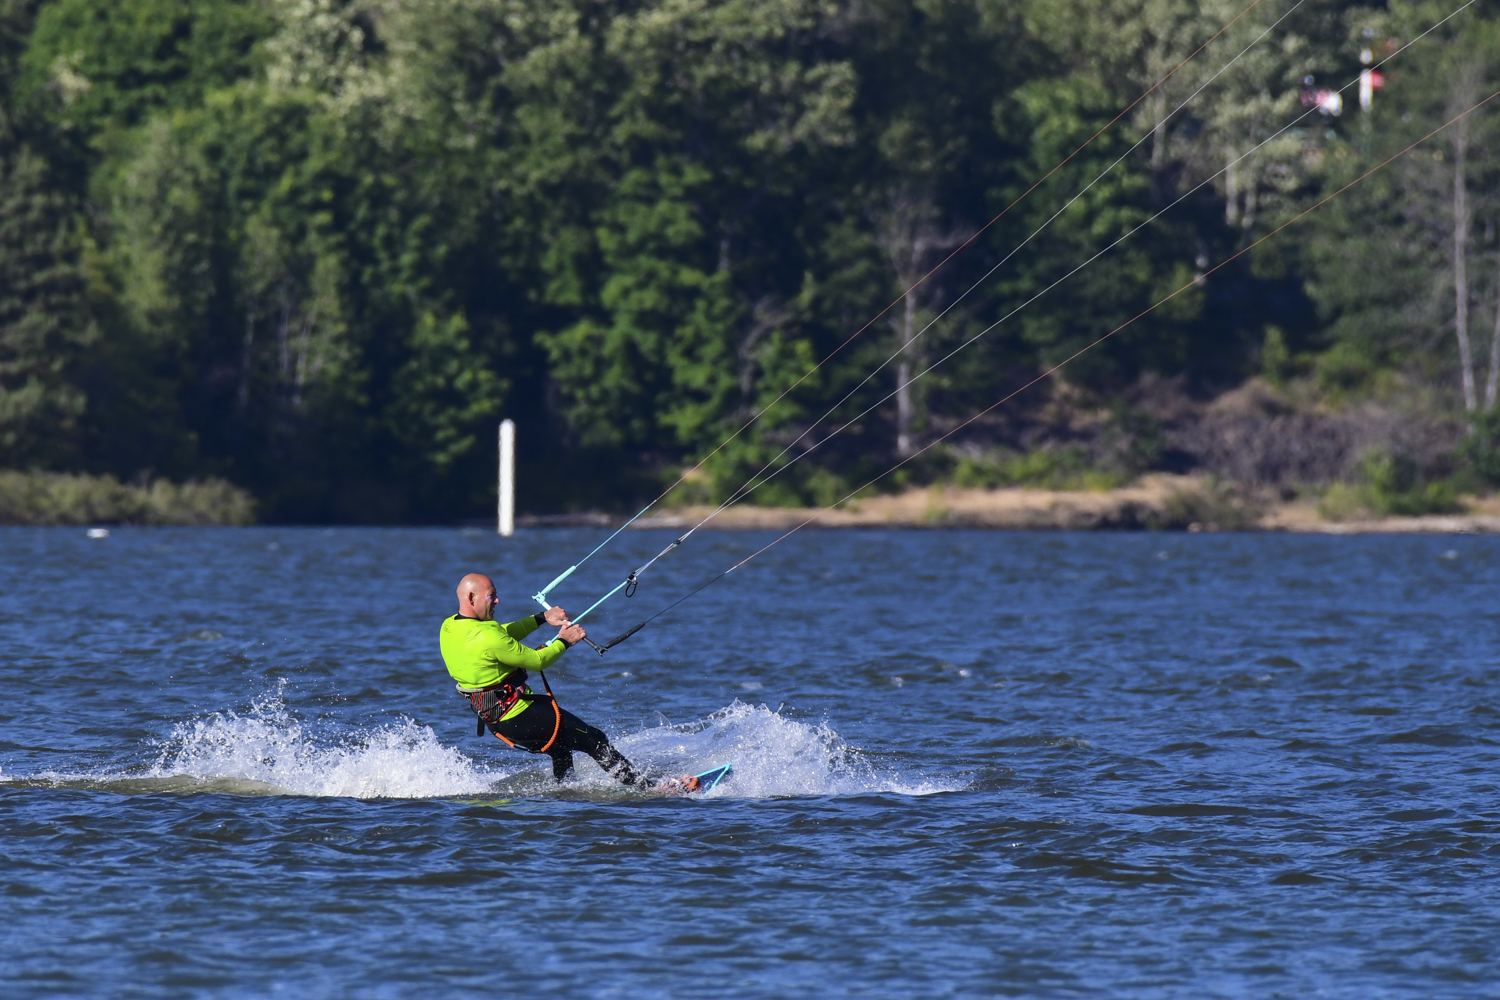 Kiteboarder sample shot from the D7500